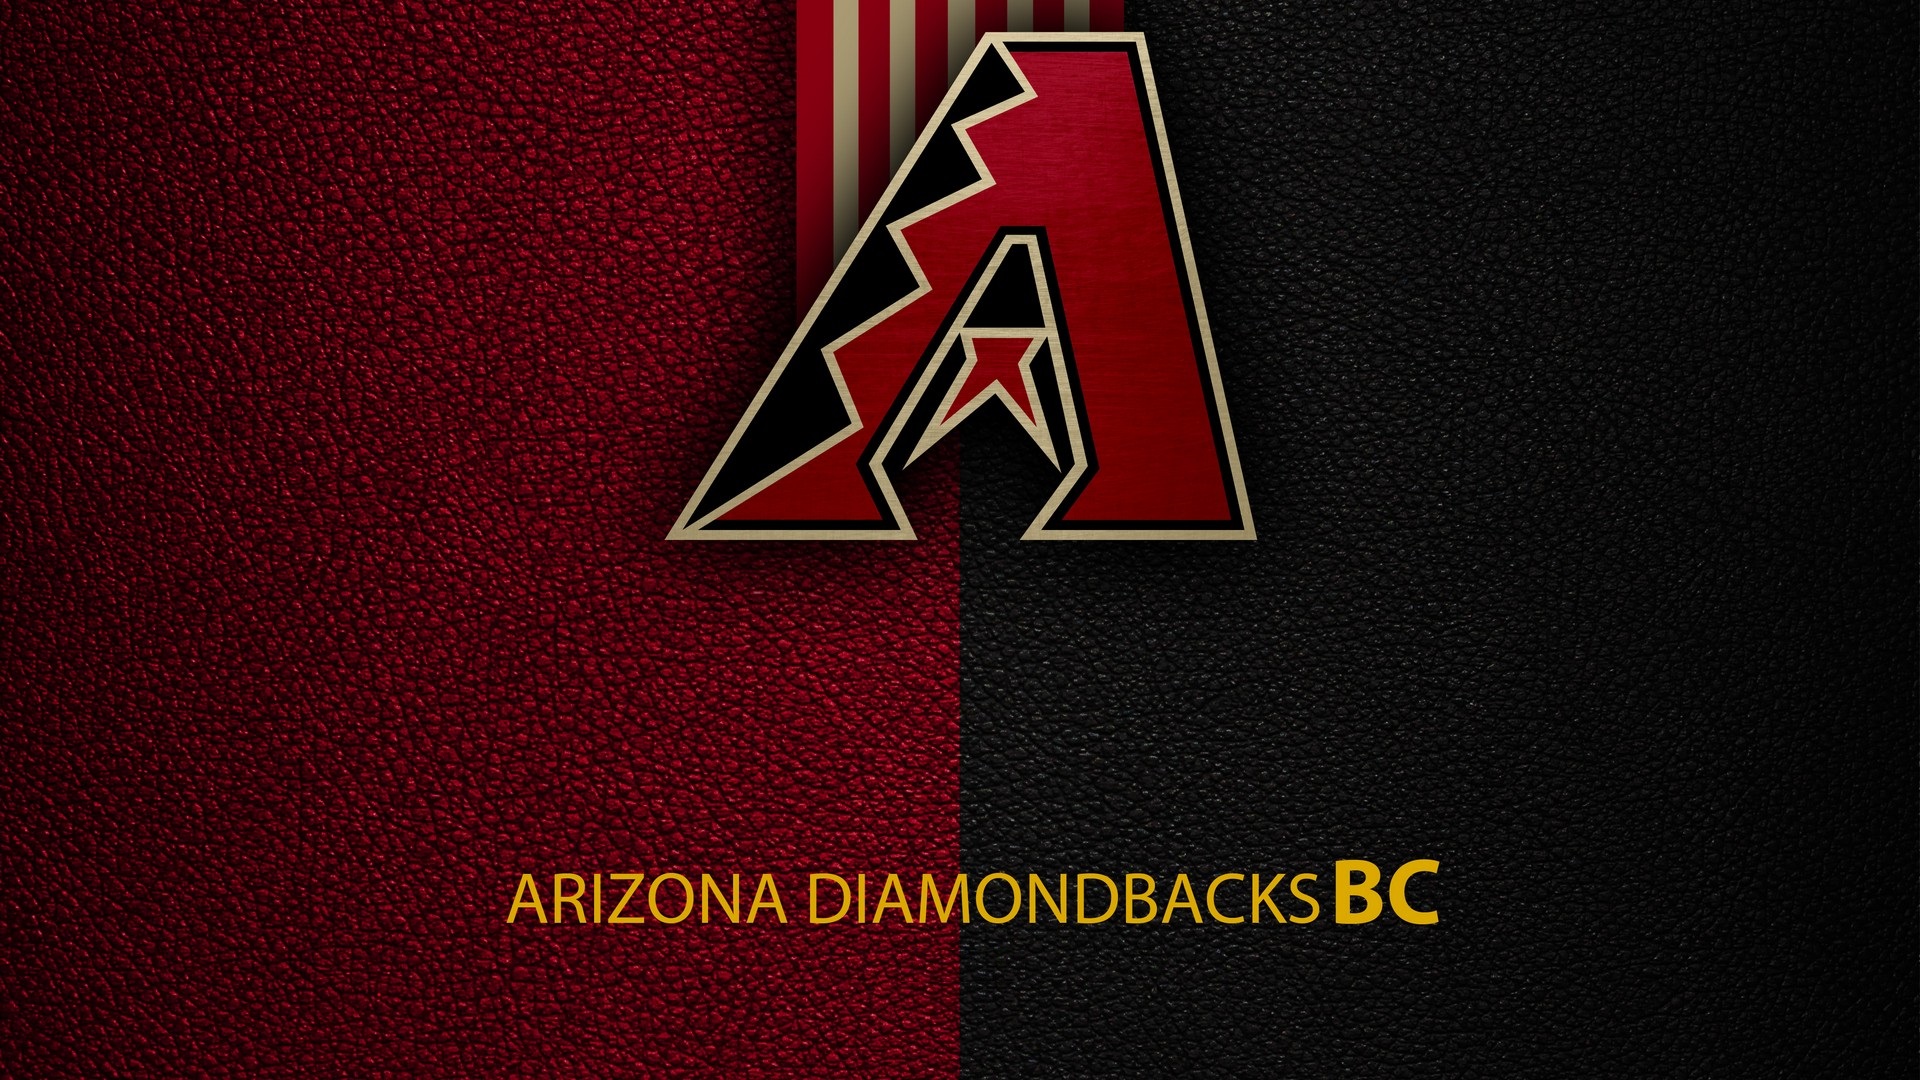 Arizona Diamondbacks Laptop Wallpaper with high-resolution 1920x1080 pixel. You can use this wallpaper for Mac Desktop Wallpaper, Laptop Screensavers, Android Wallpapers, Tablet or iPhone Home Screen and another mobile phone device